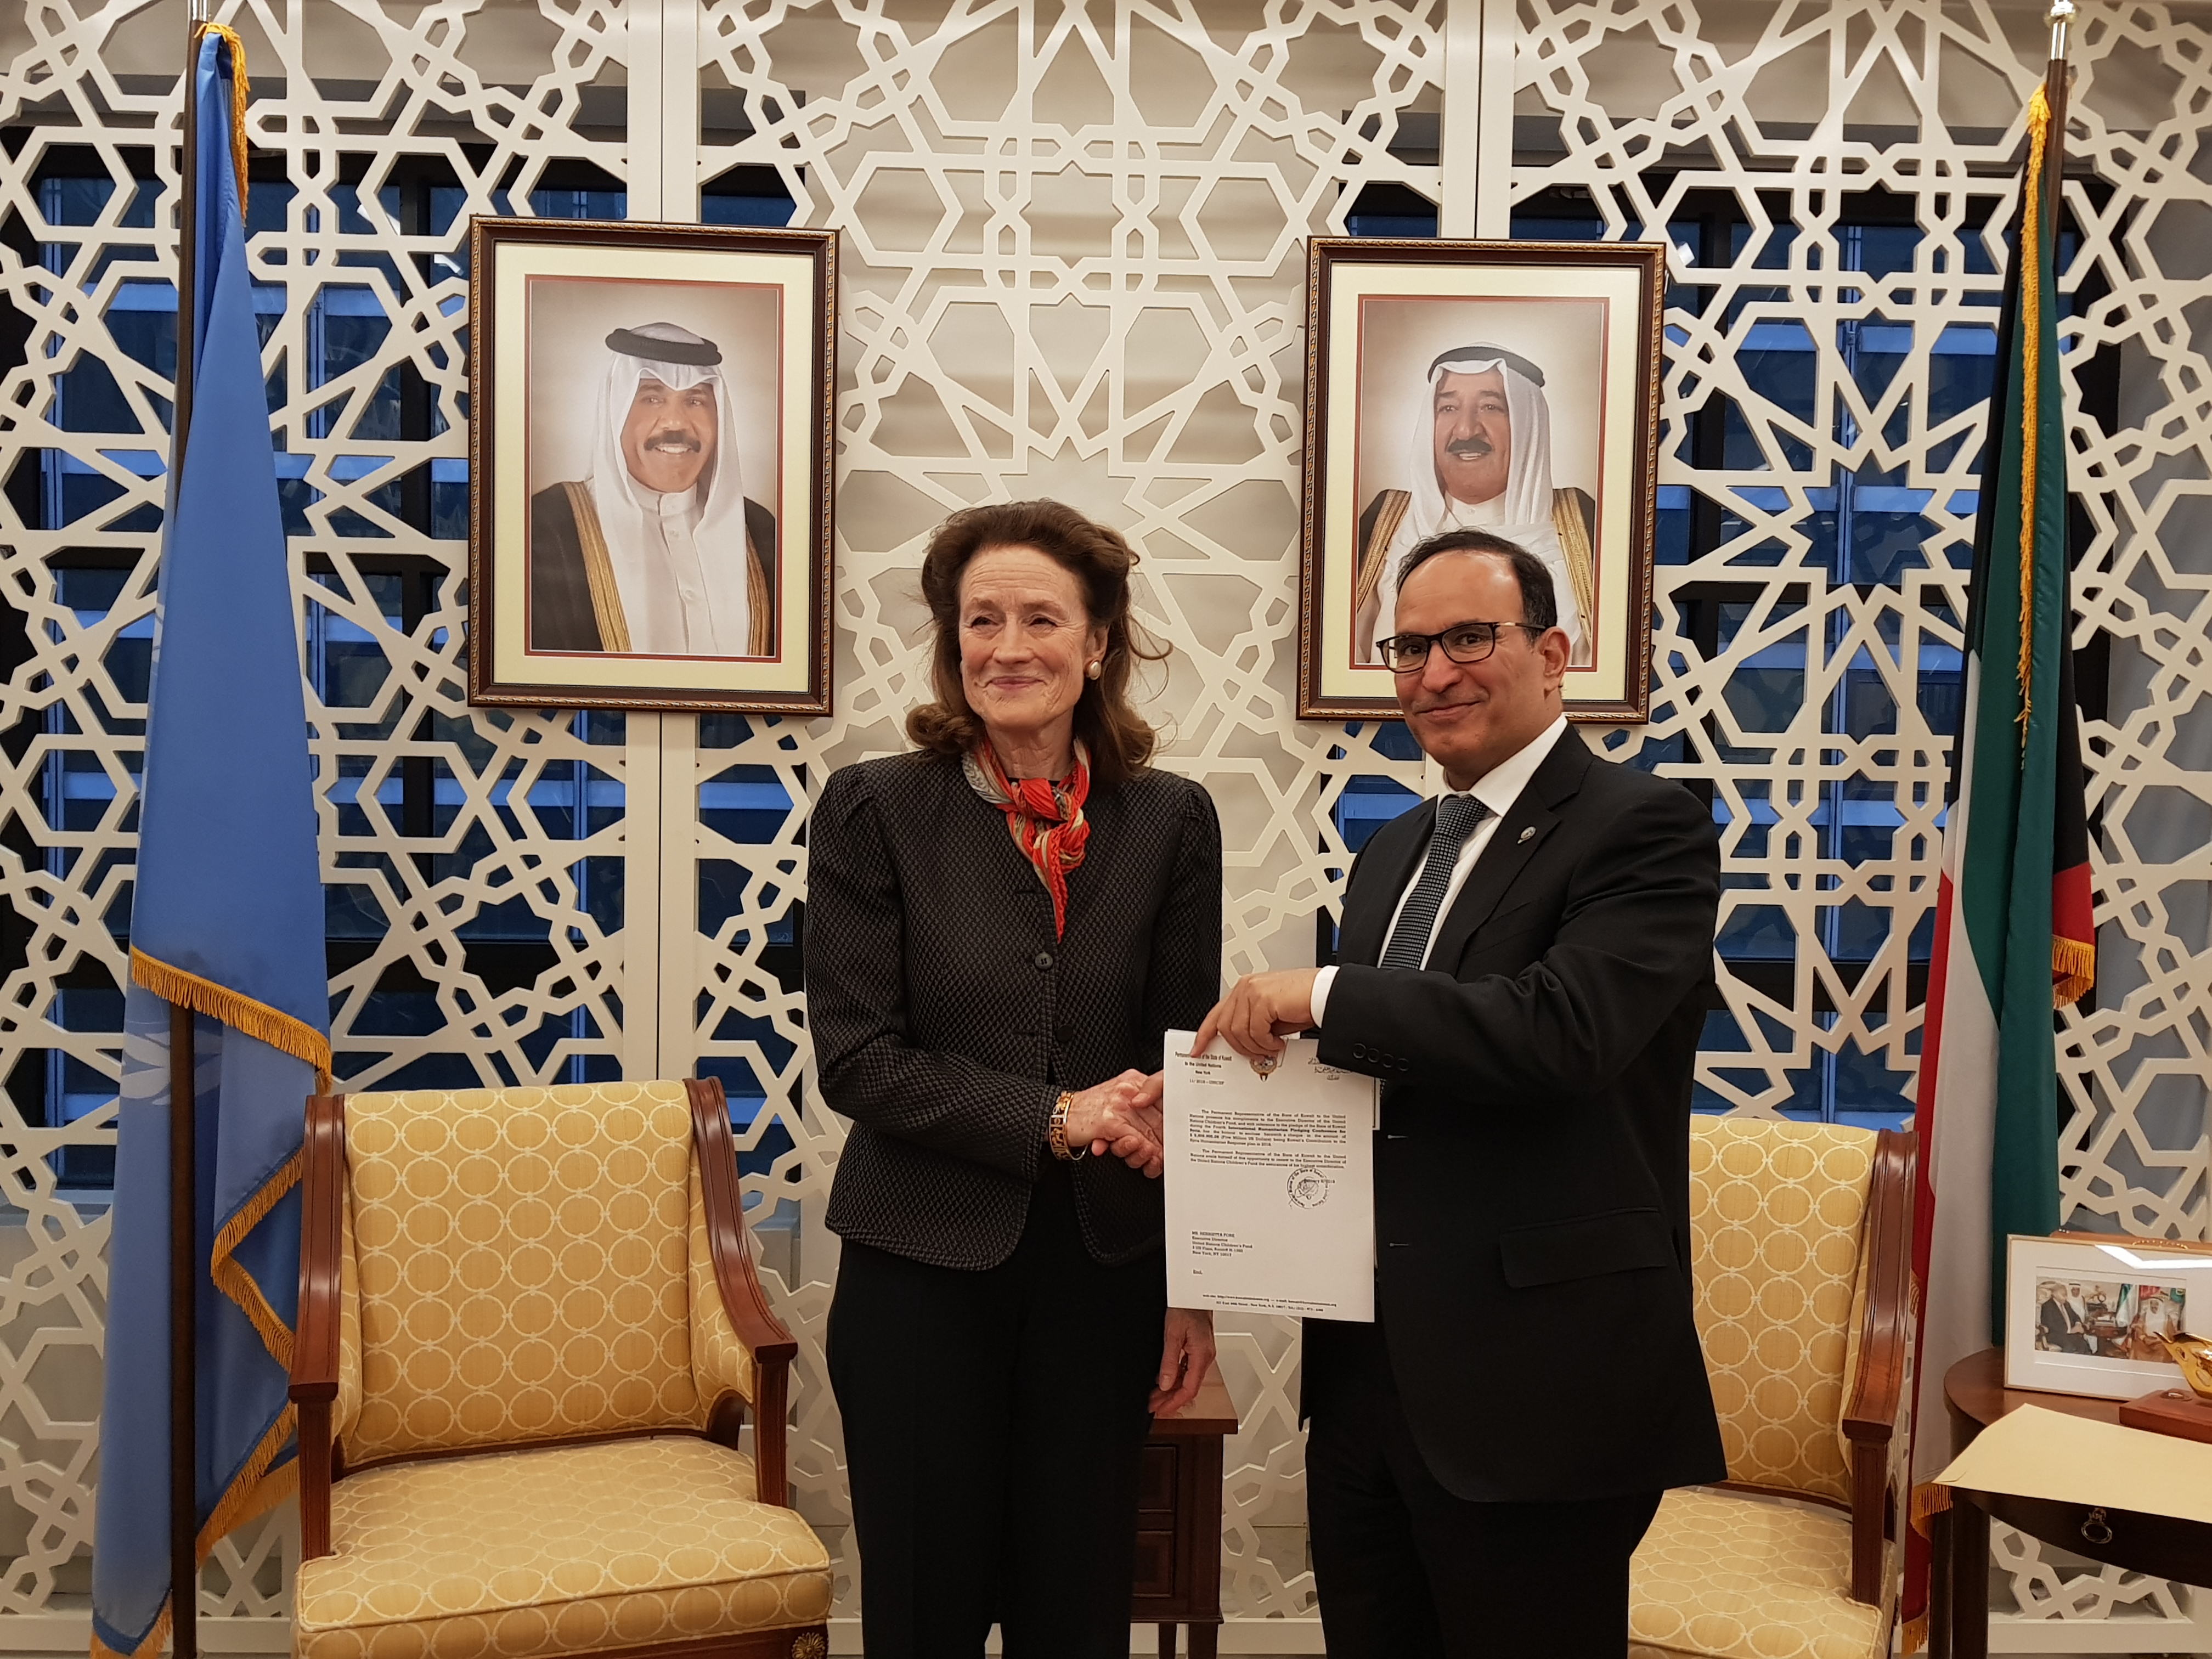 Kuwait's Permanent Representative to the United Nations, Ambassador Mansour Al-Otaibi handes over financial contributions from Kuwait